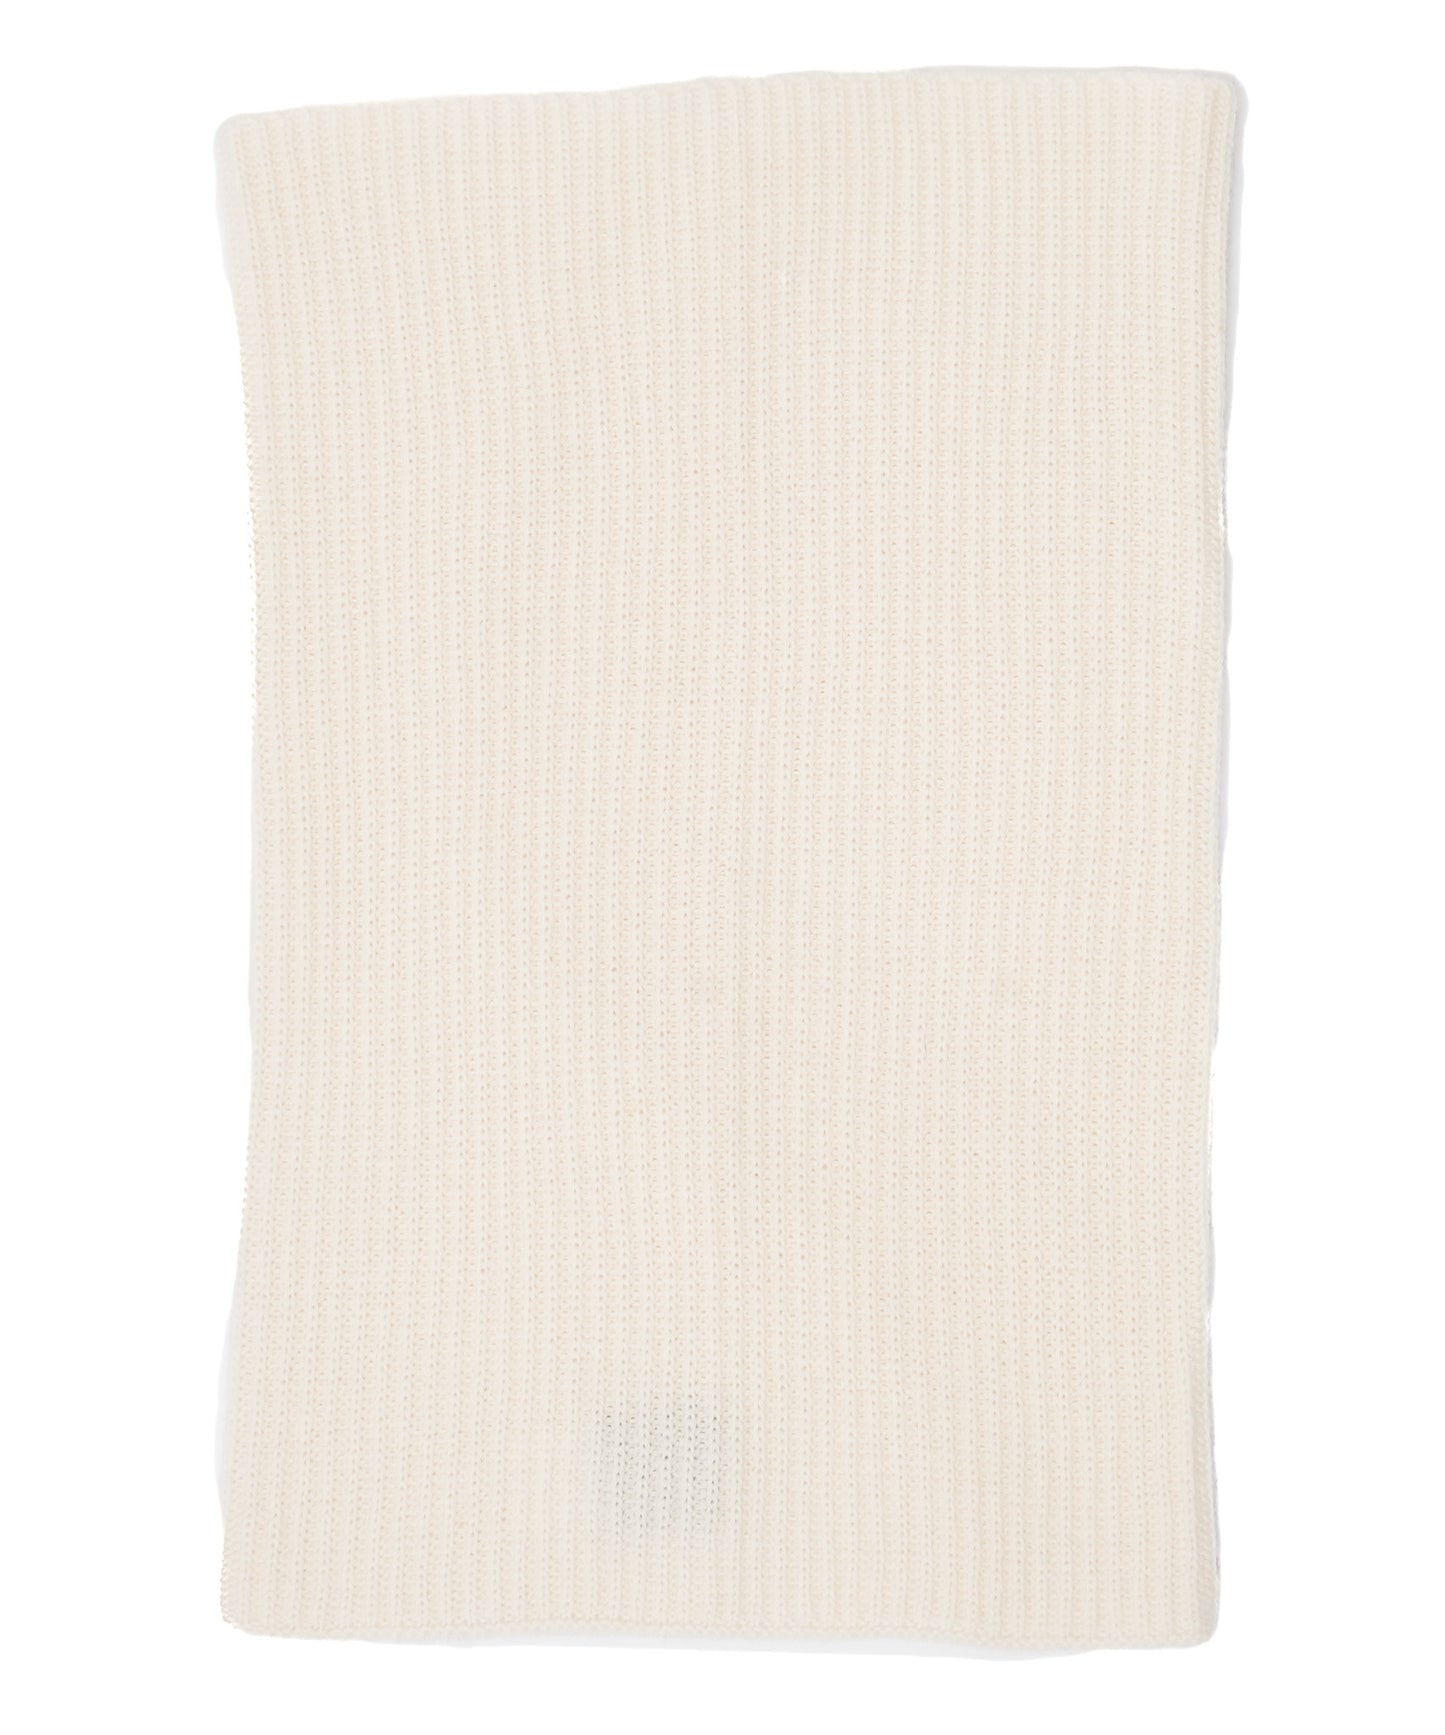 Wool/Cashmere  Neck Warmer in color Cream